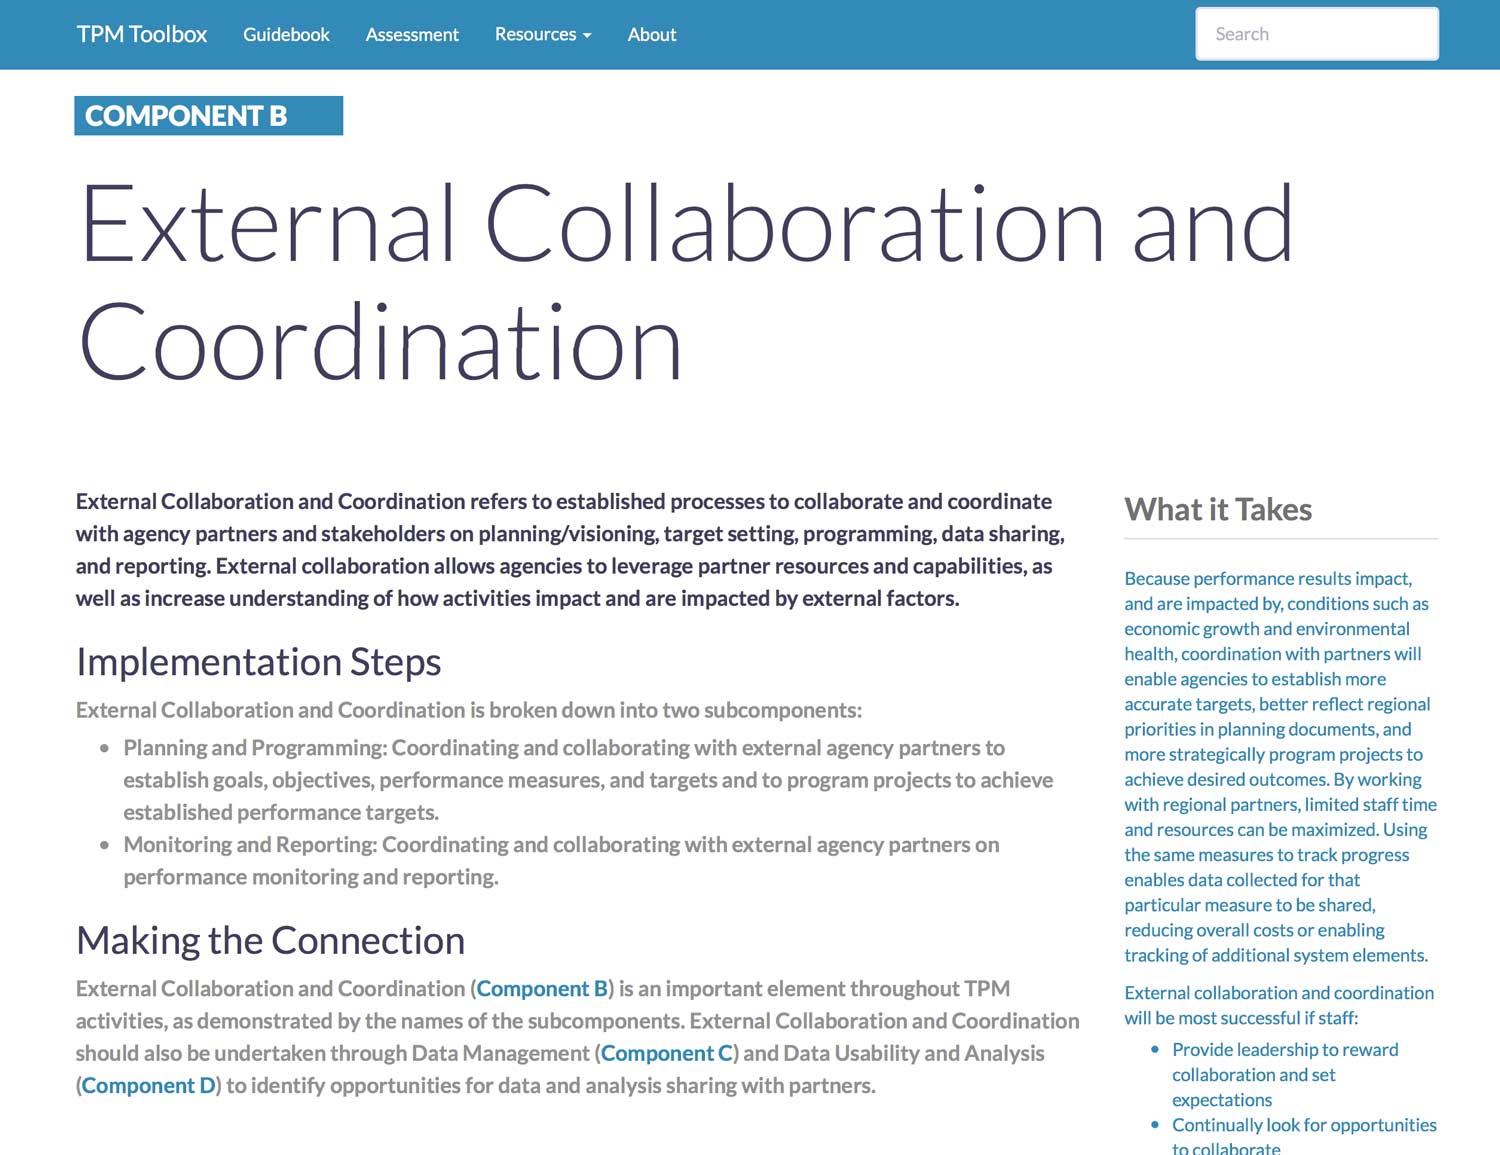 Thumbnail image of Component B Summary webpage. External Collaboration and Coordination refers to established processes to collaborate and coordinate with agency partners and stakeholders on planning/visioning, target setting, programming, data sharing, and reporting.